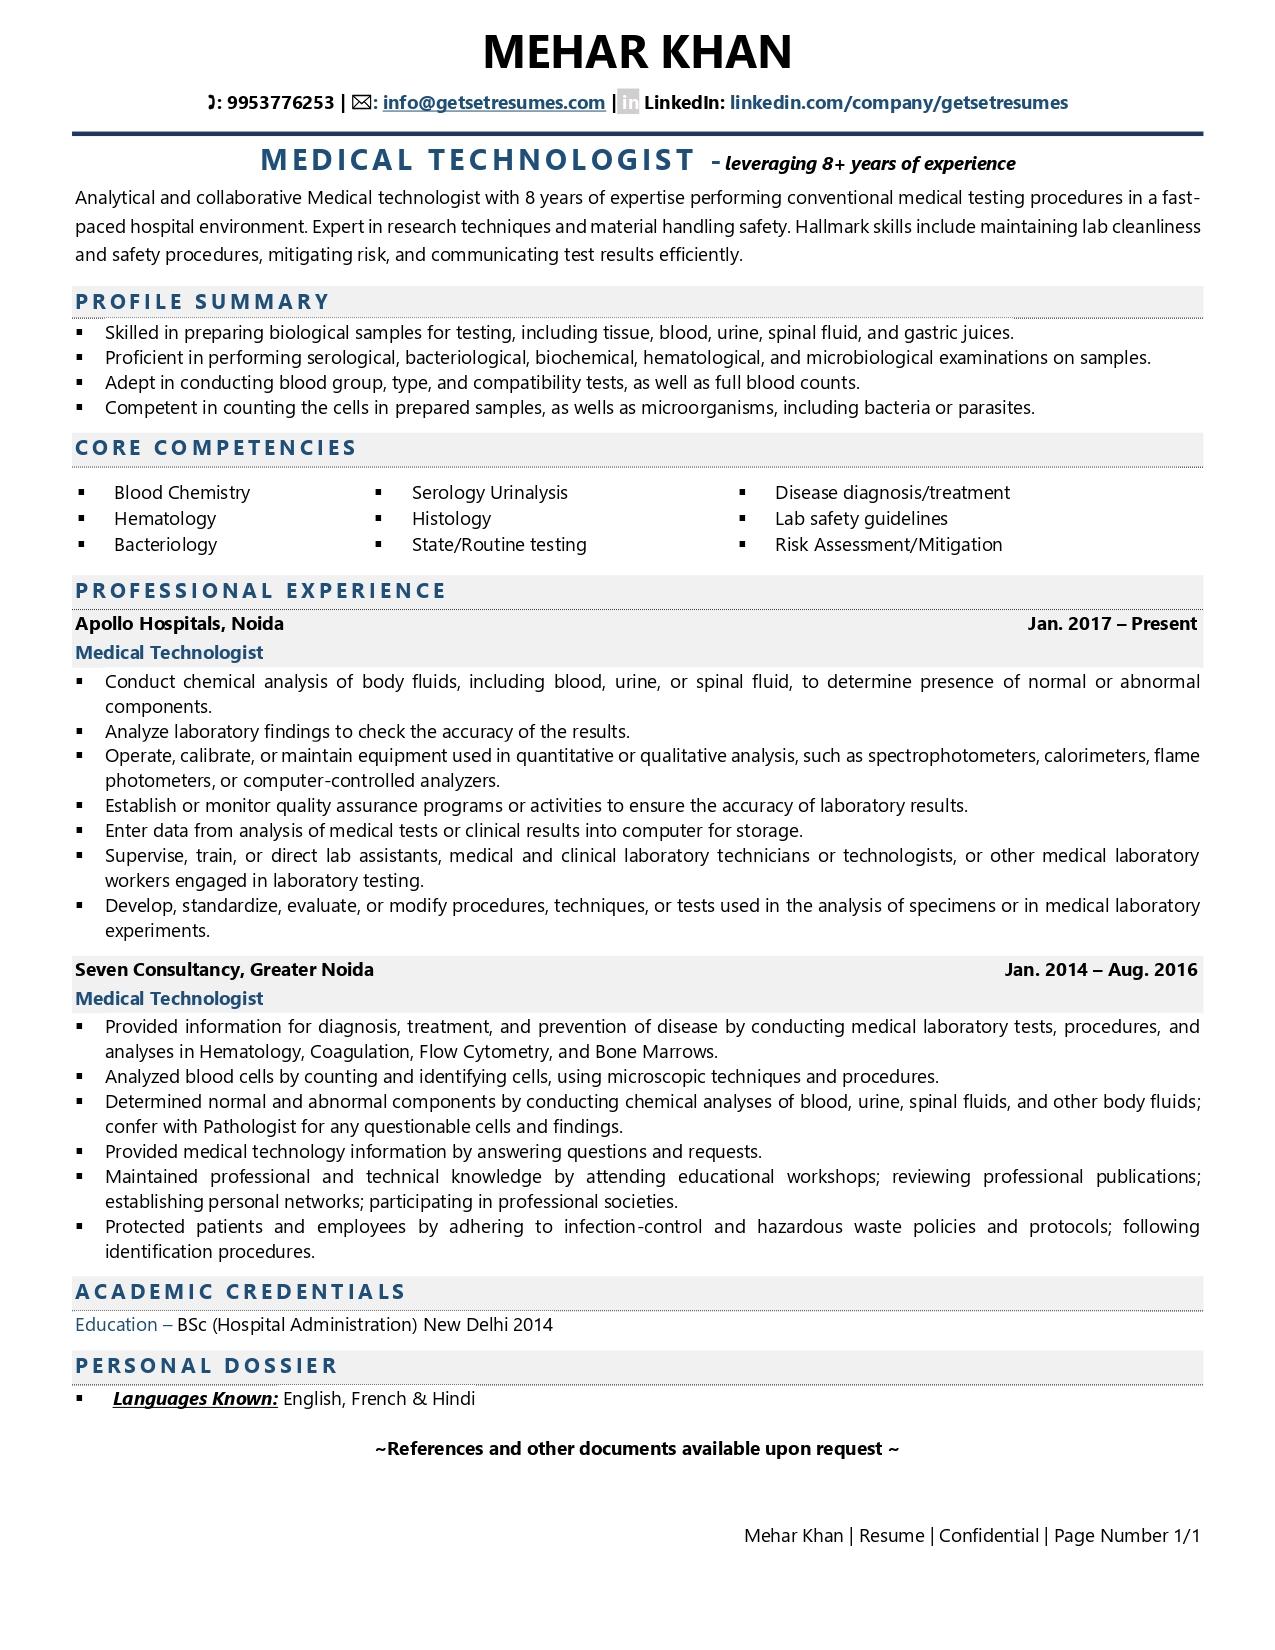 objective statement for resume medical technologist